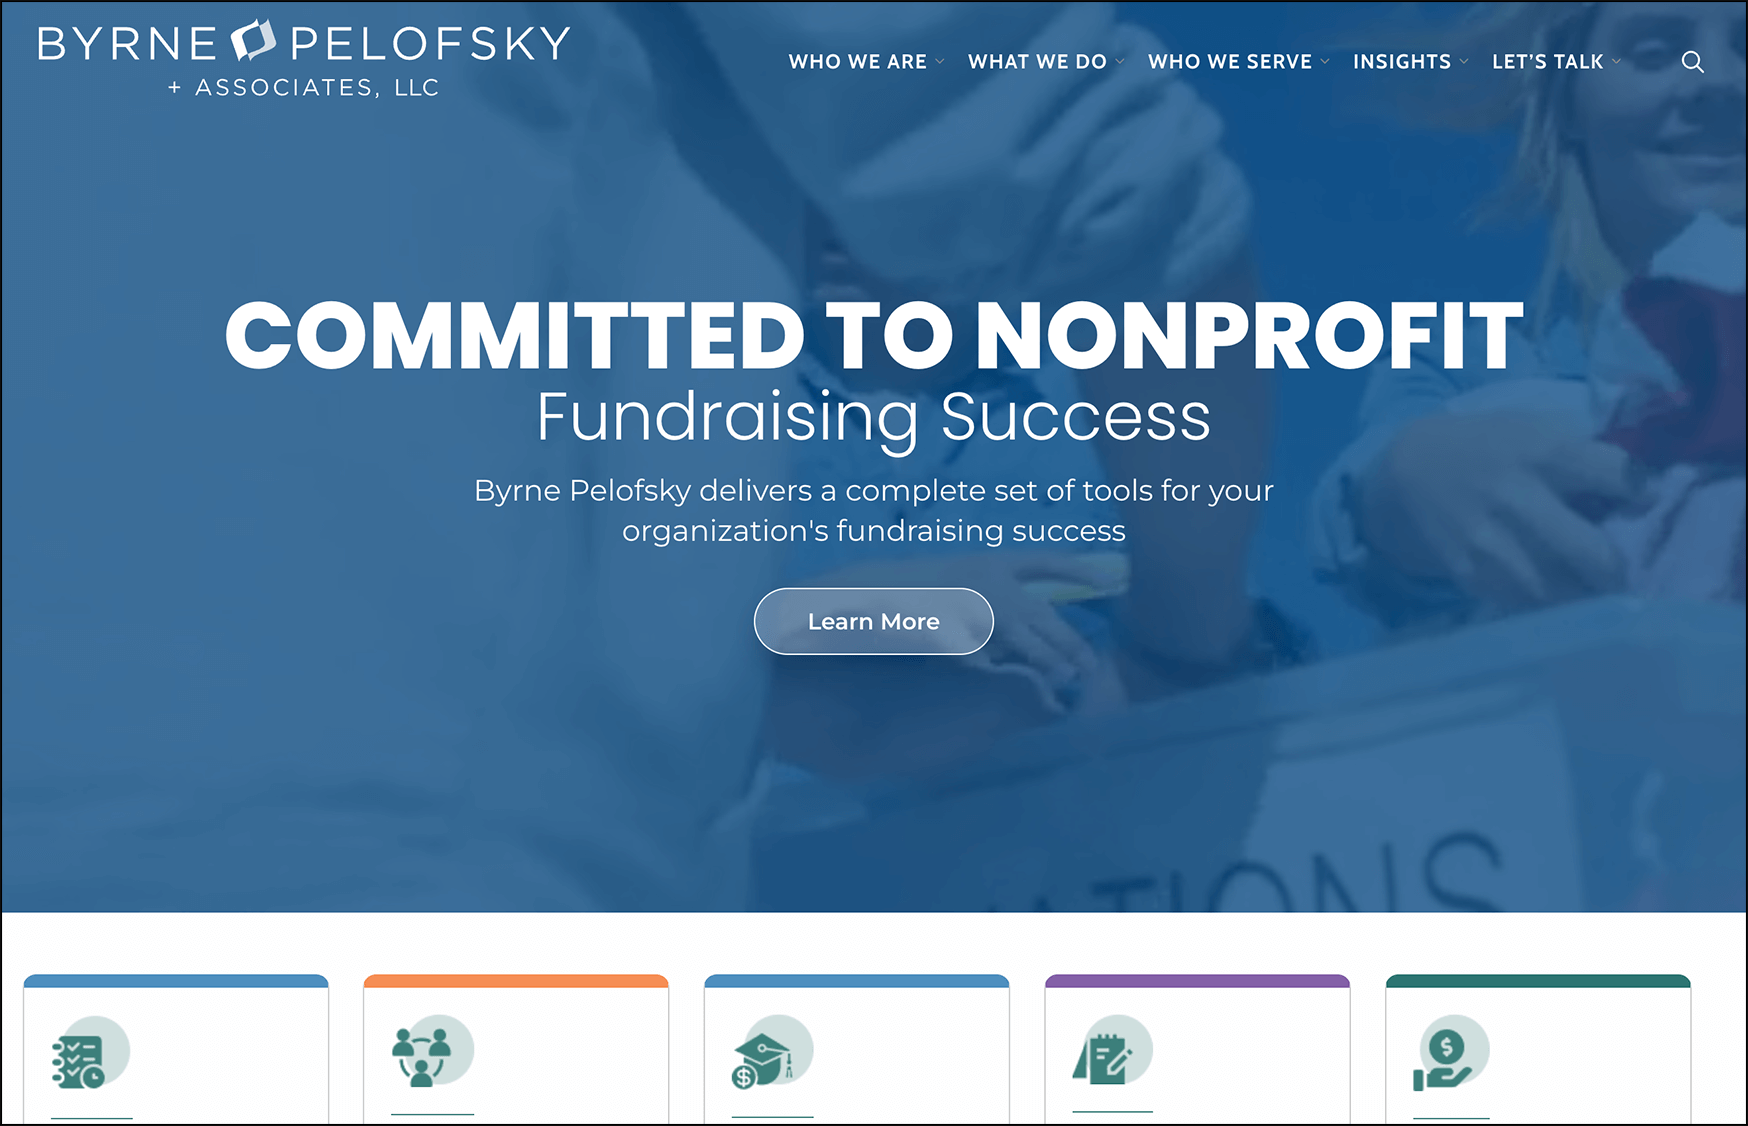 Byrne Pelofsky + Associates is a top fundraising consulting firm. 